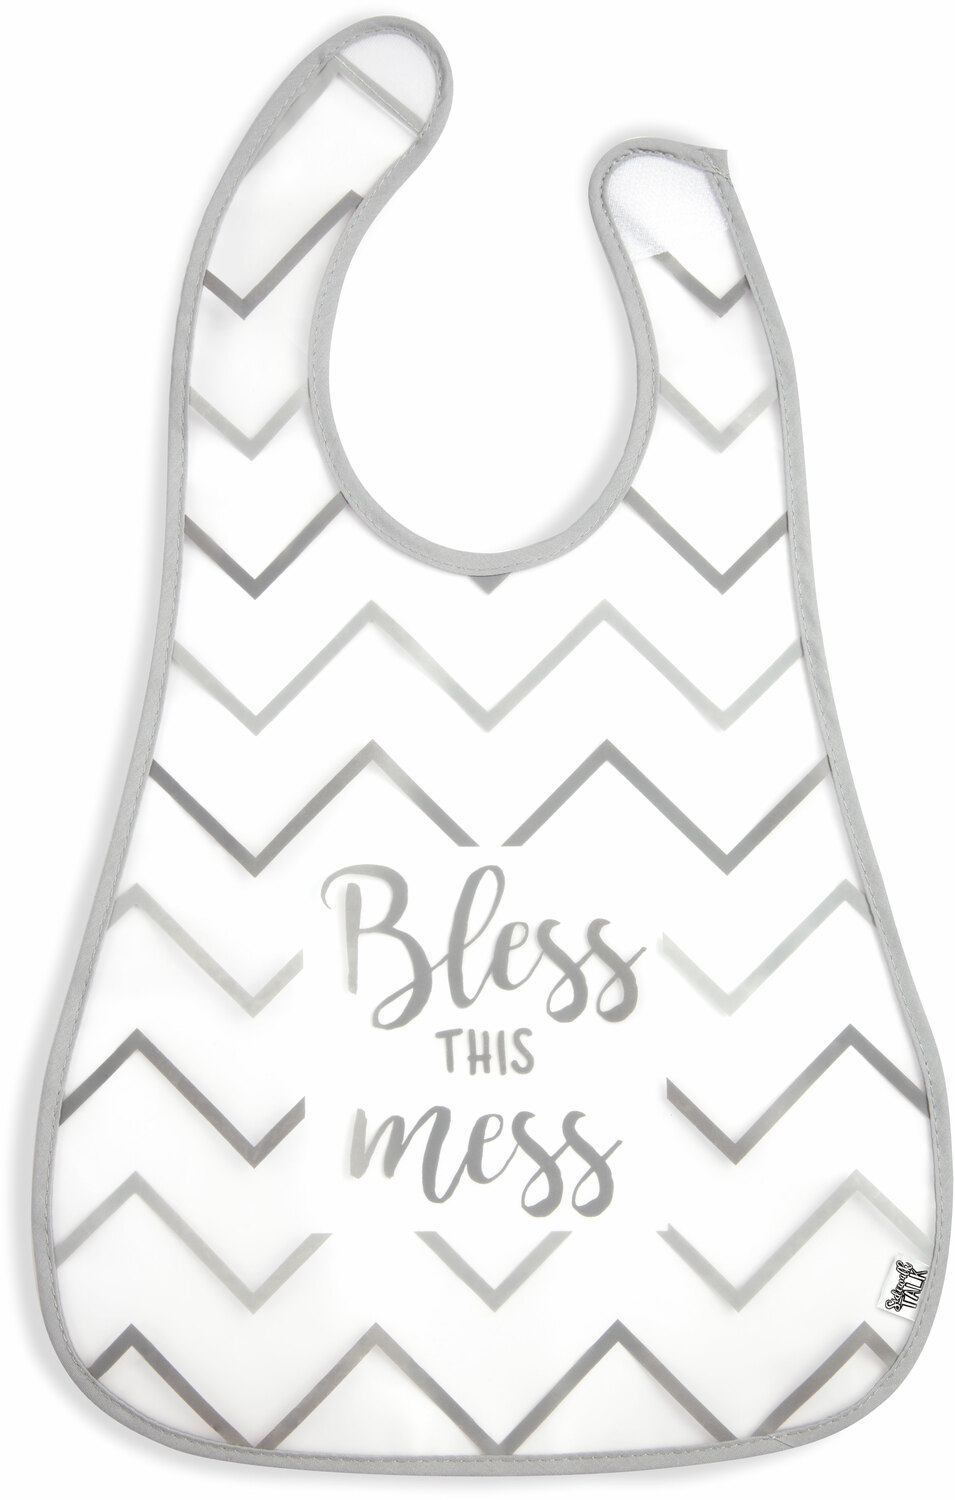 Bless This Mess by Sidewalk Talk - Bless This Mess - Waterproof Bib